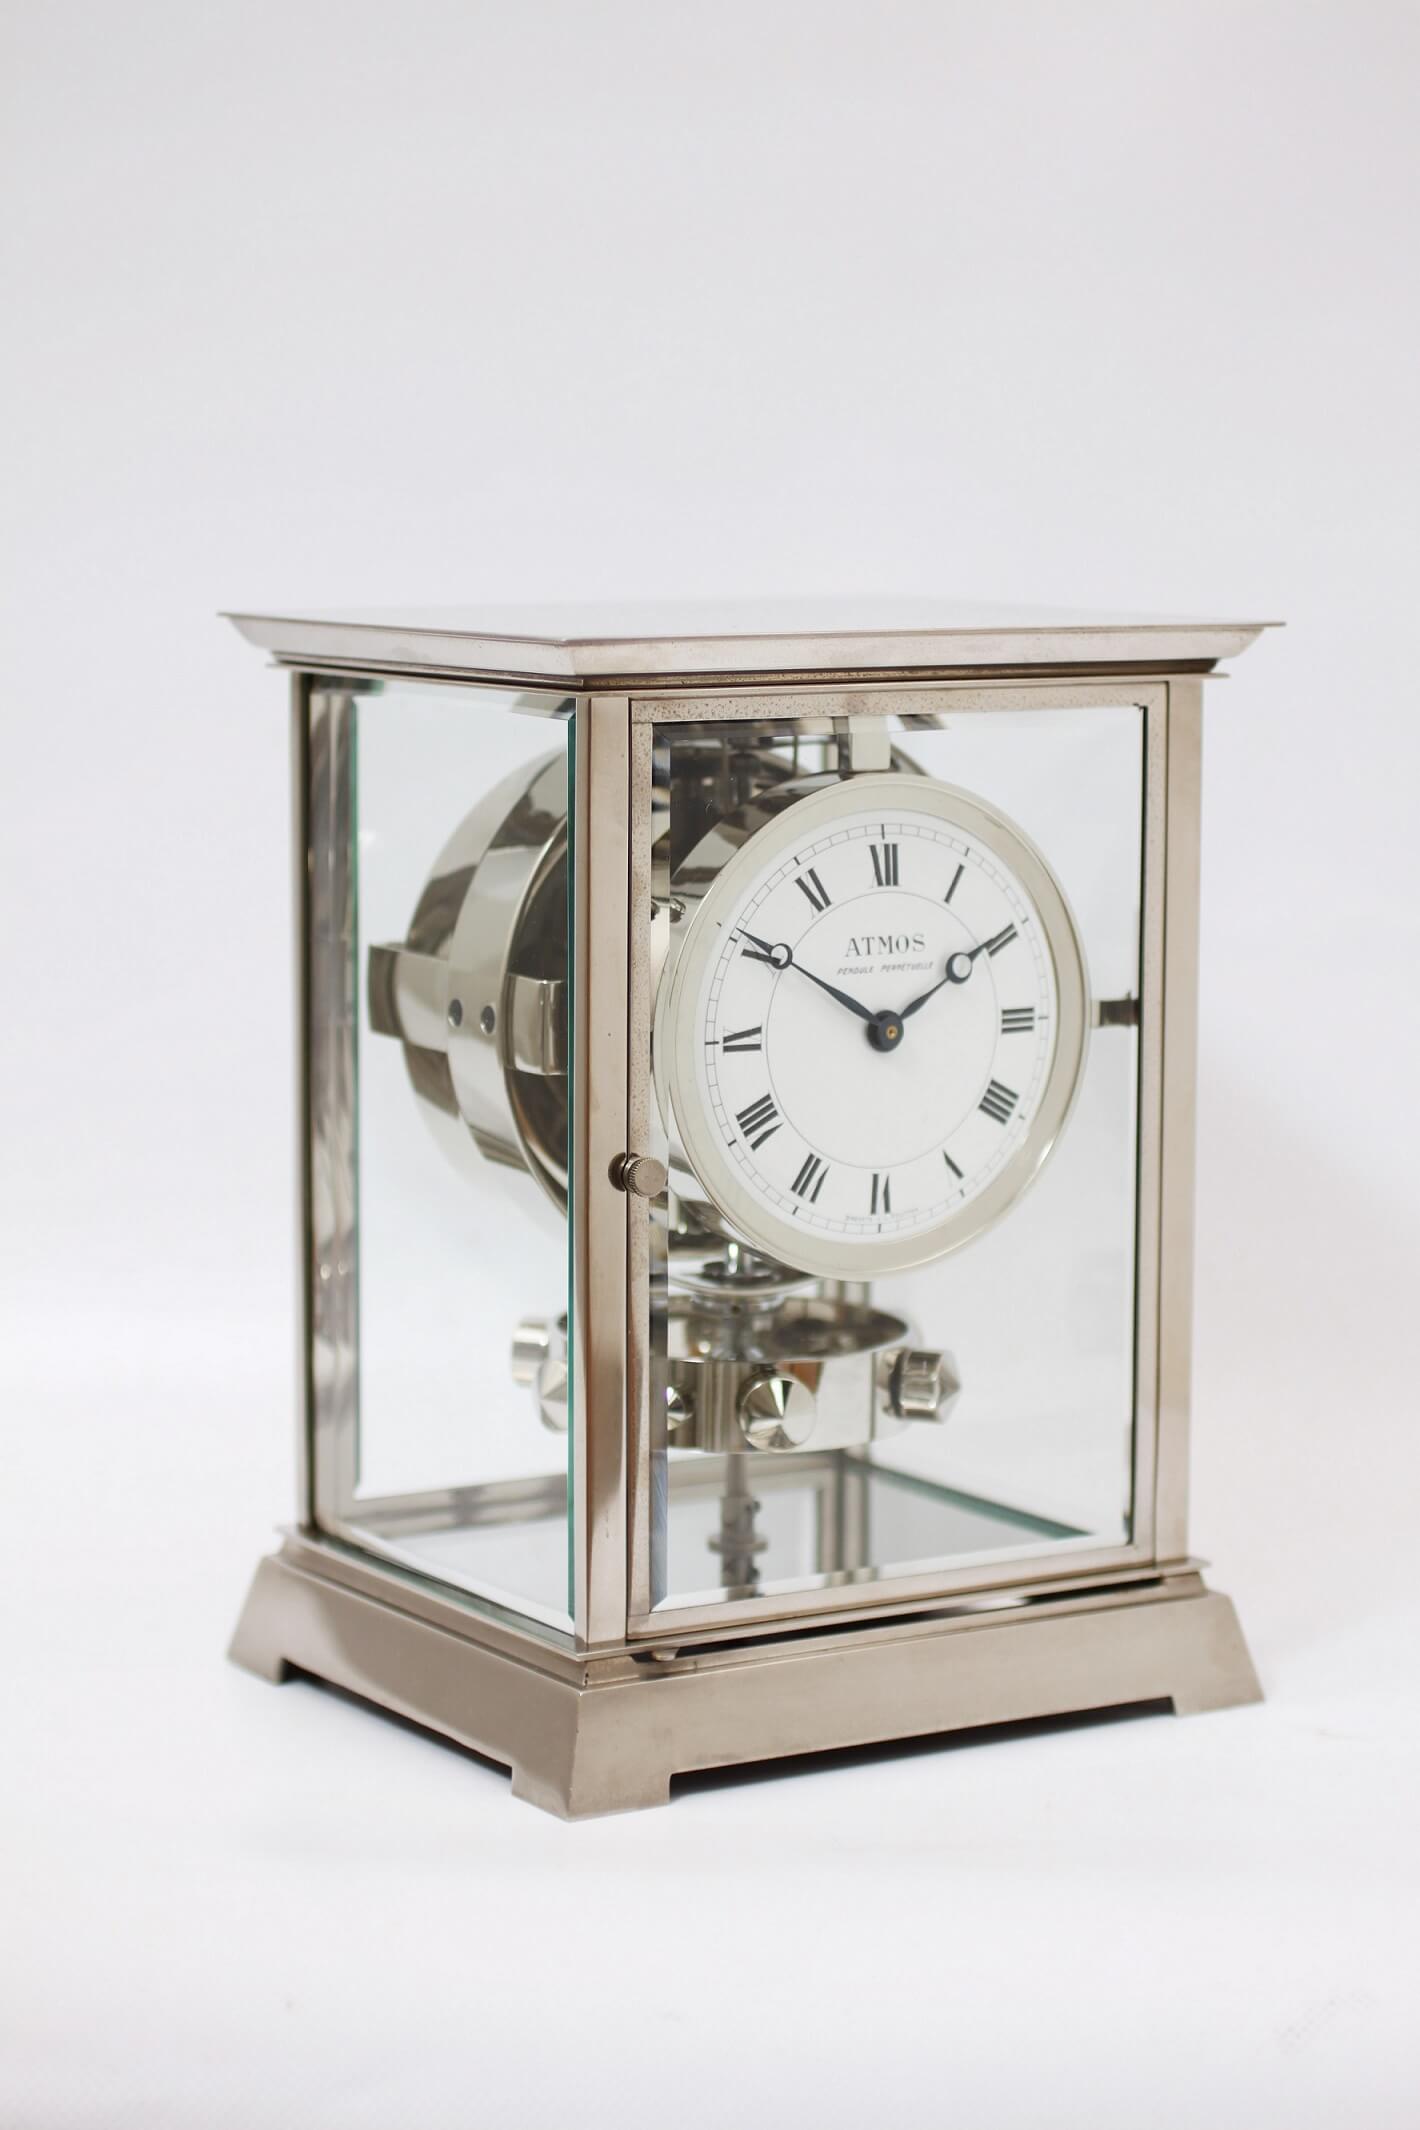 French Reutter Atmos nickel plated circa 1930